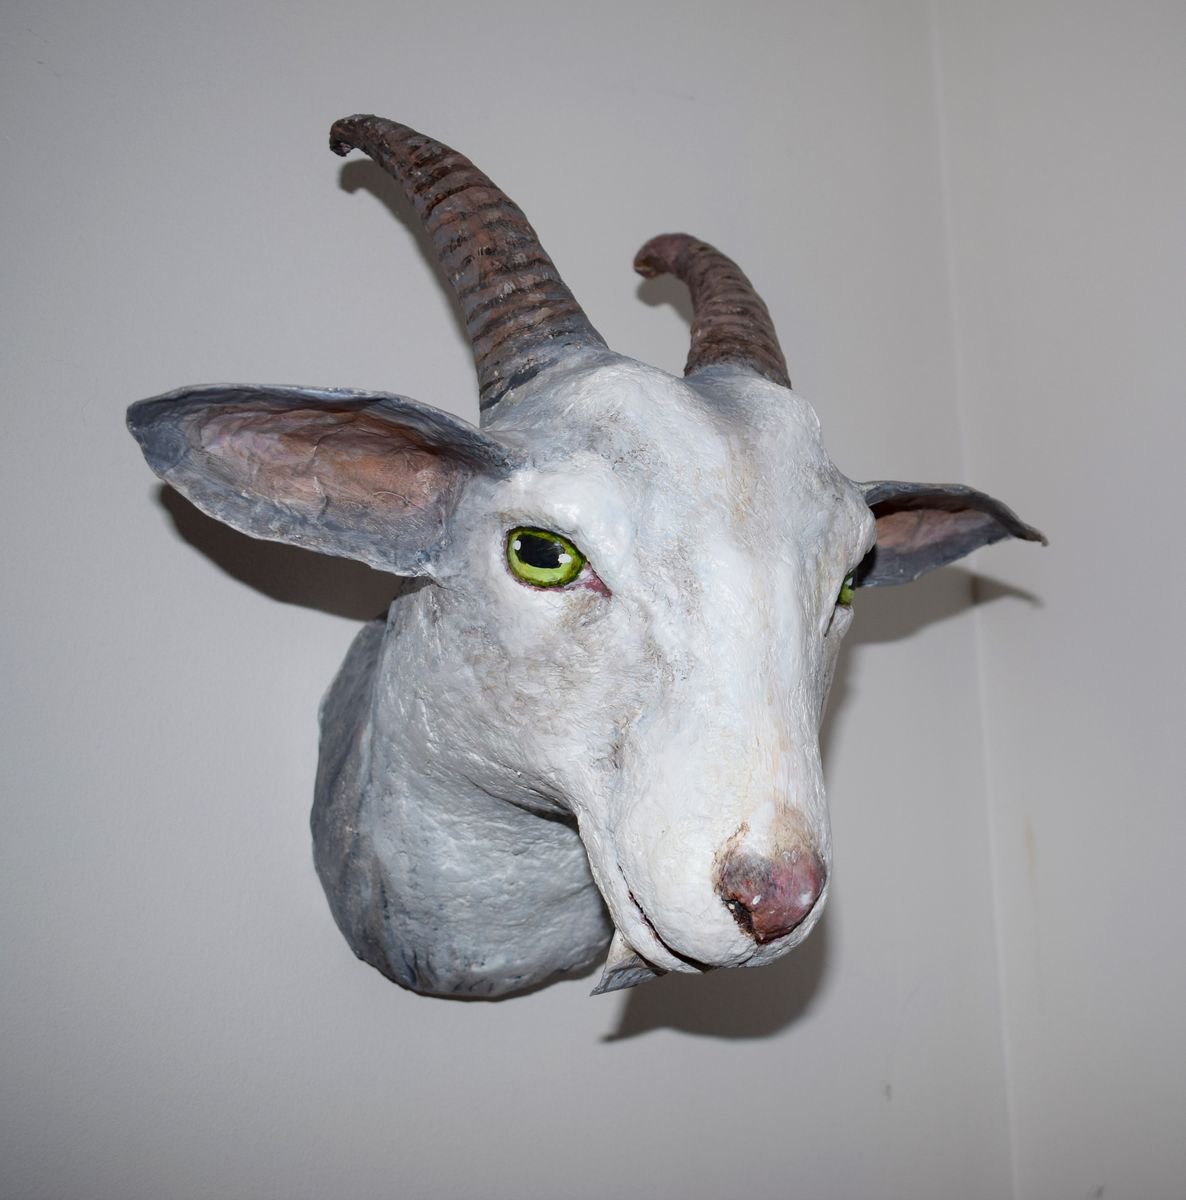 Goat Head by Victoria Stanway